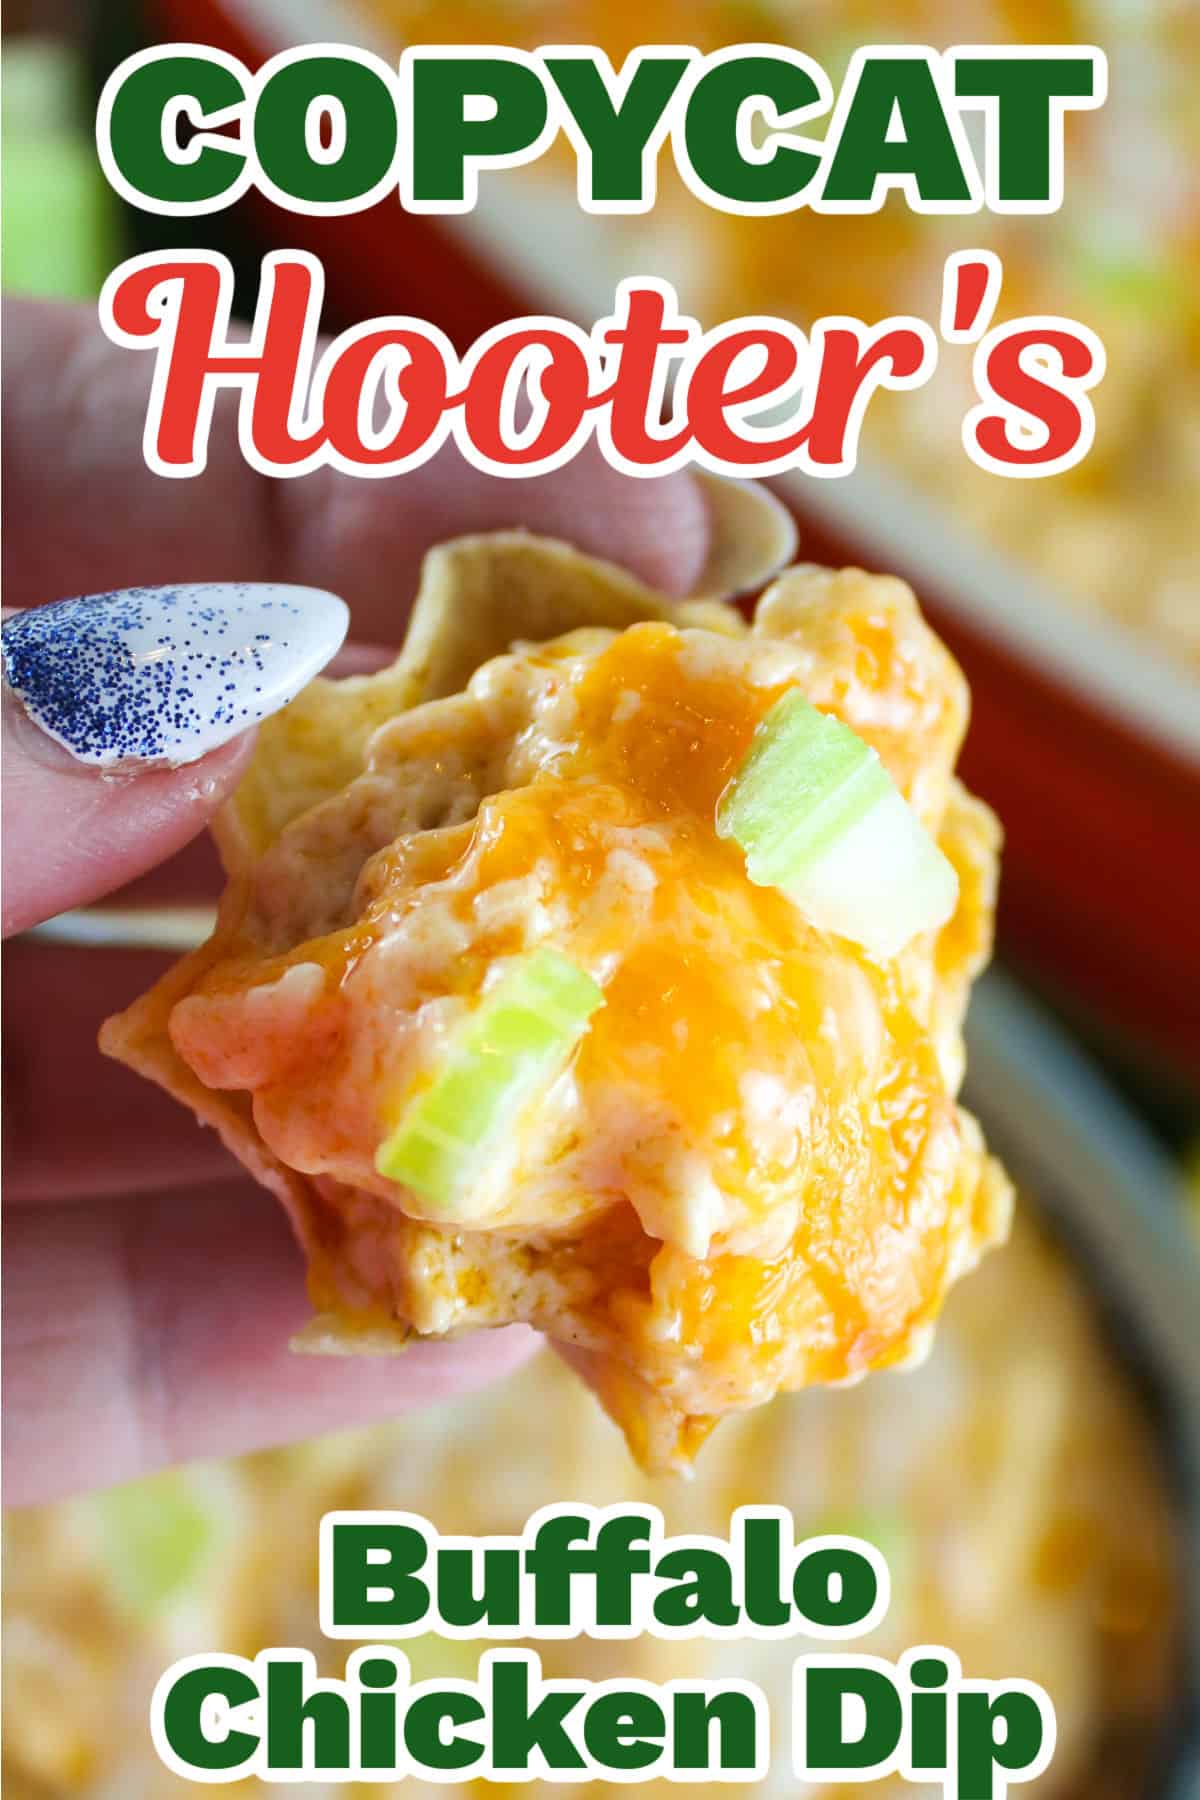 Hooter's Buffalo Chicken Dip is one of a kind - mainly because of Hooter's world-famous Wing Sauces! This Game Day appetizer will have everyone cheering on the chef - no matter who's winning the game!  via @foodhussy